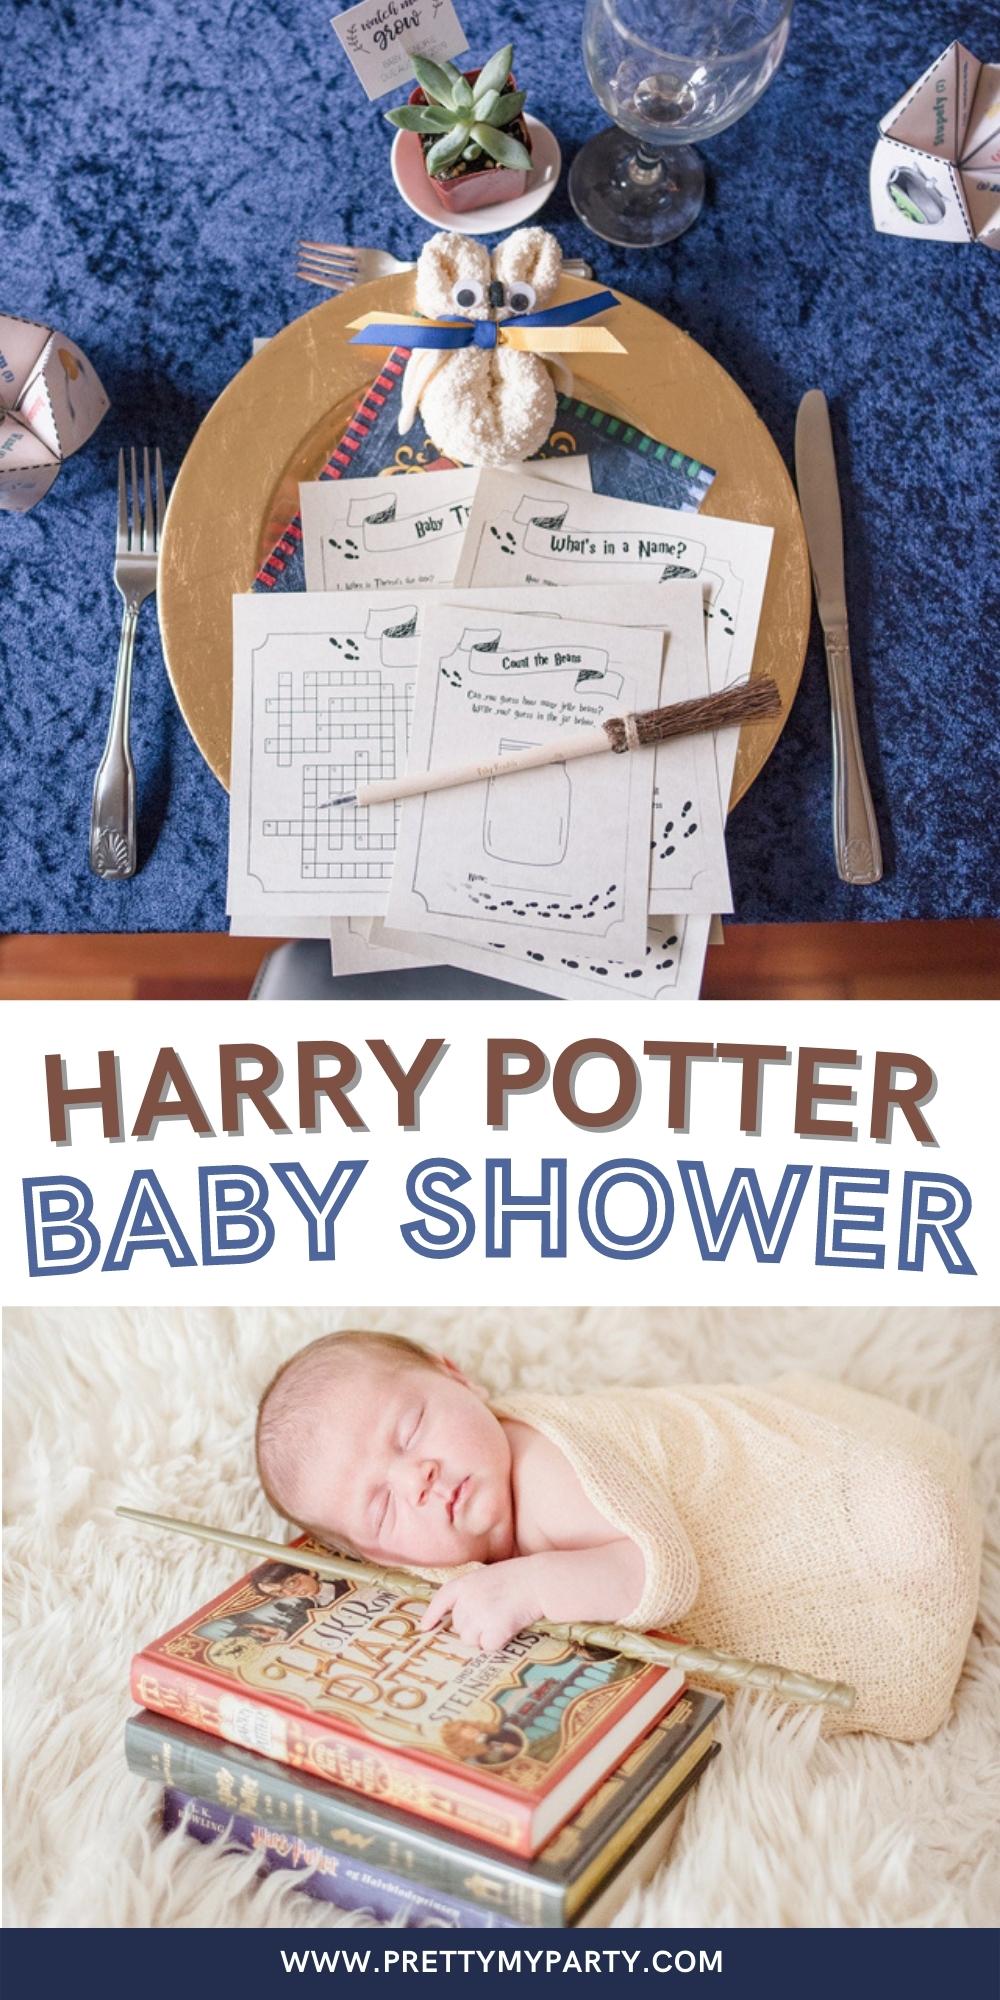 Harry Potter Baby Shower Theme and Catch Up By Bumble and Bustle